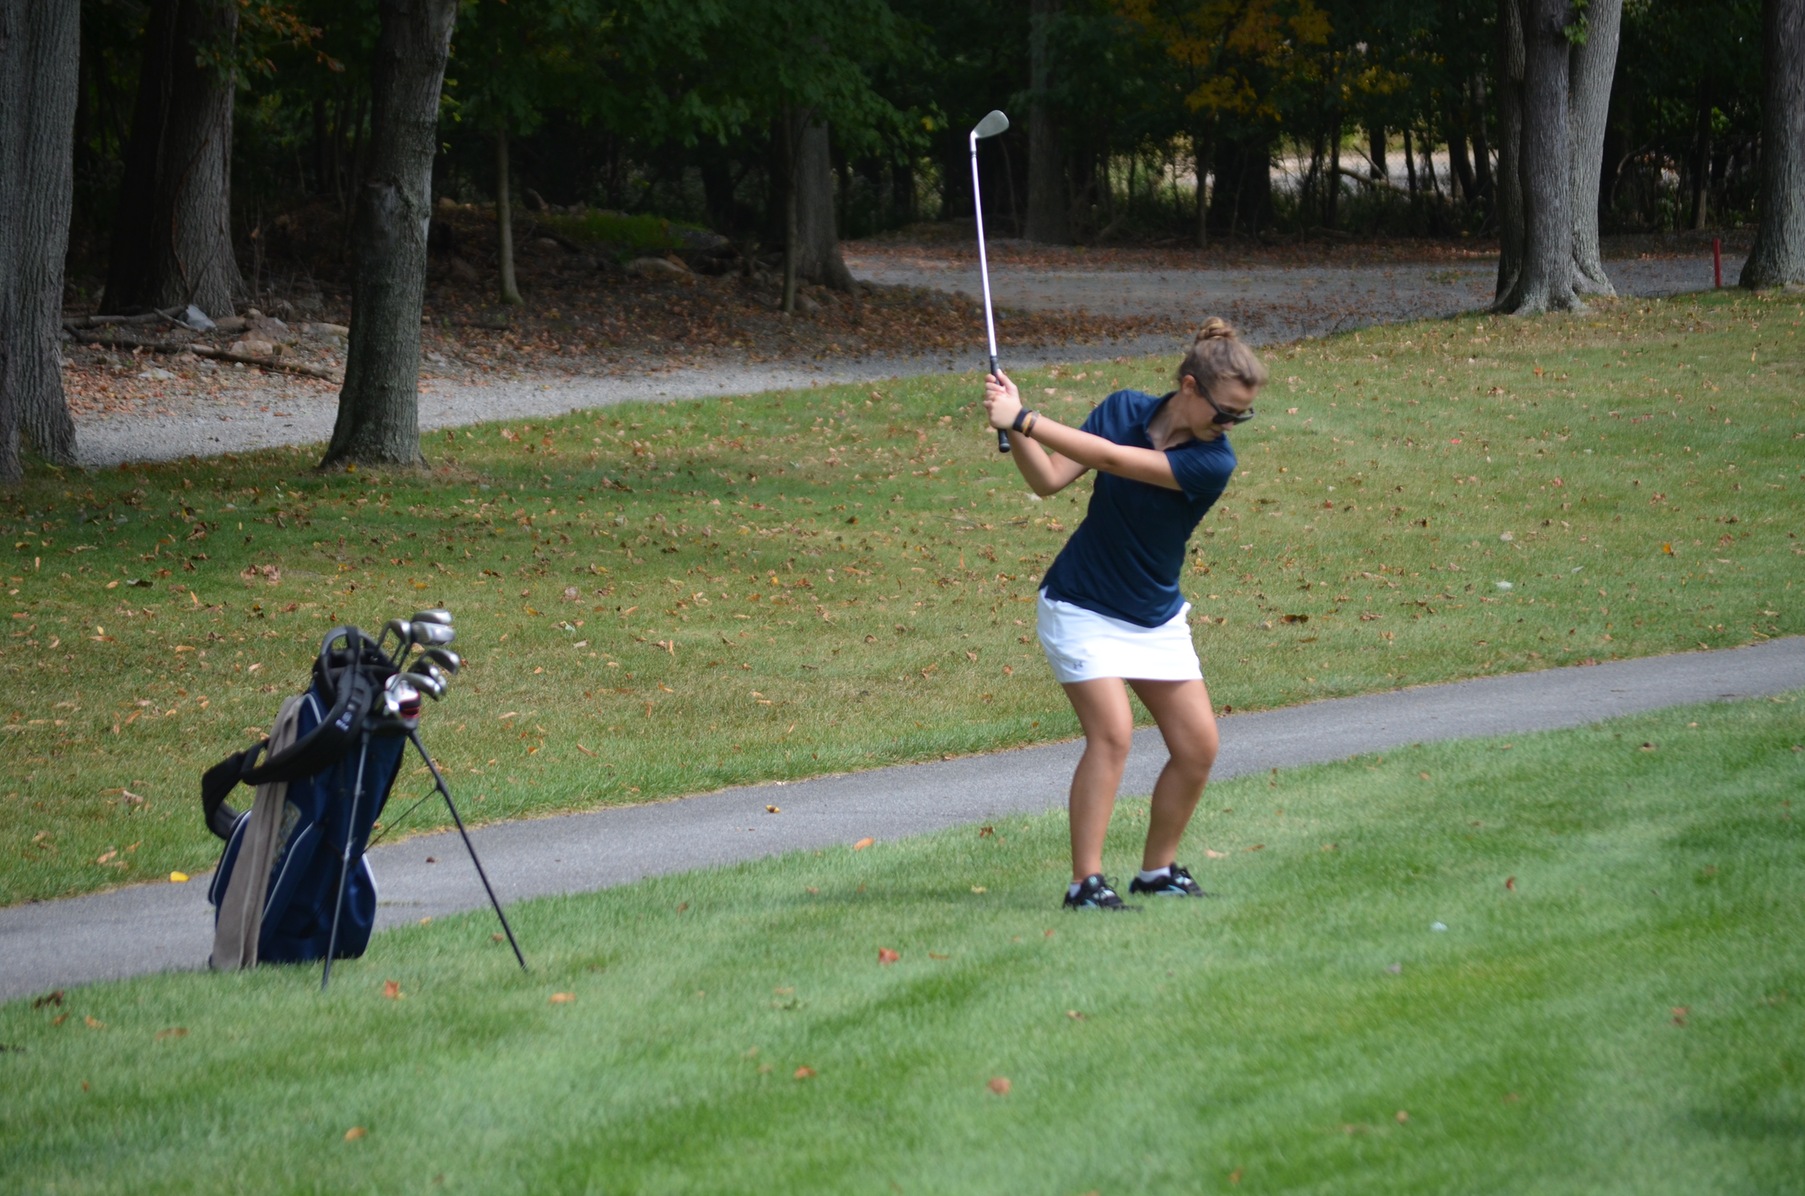 Women’s Golf Team Completes First Weekend of Play